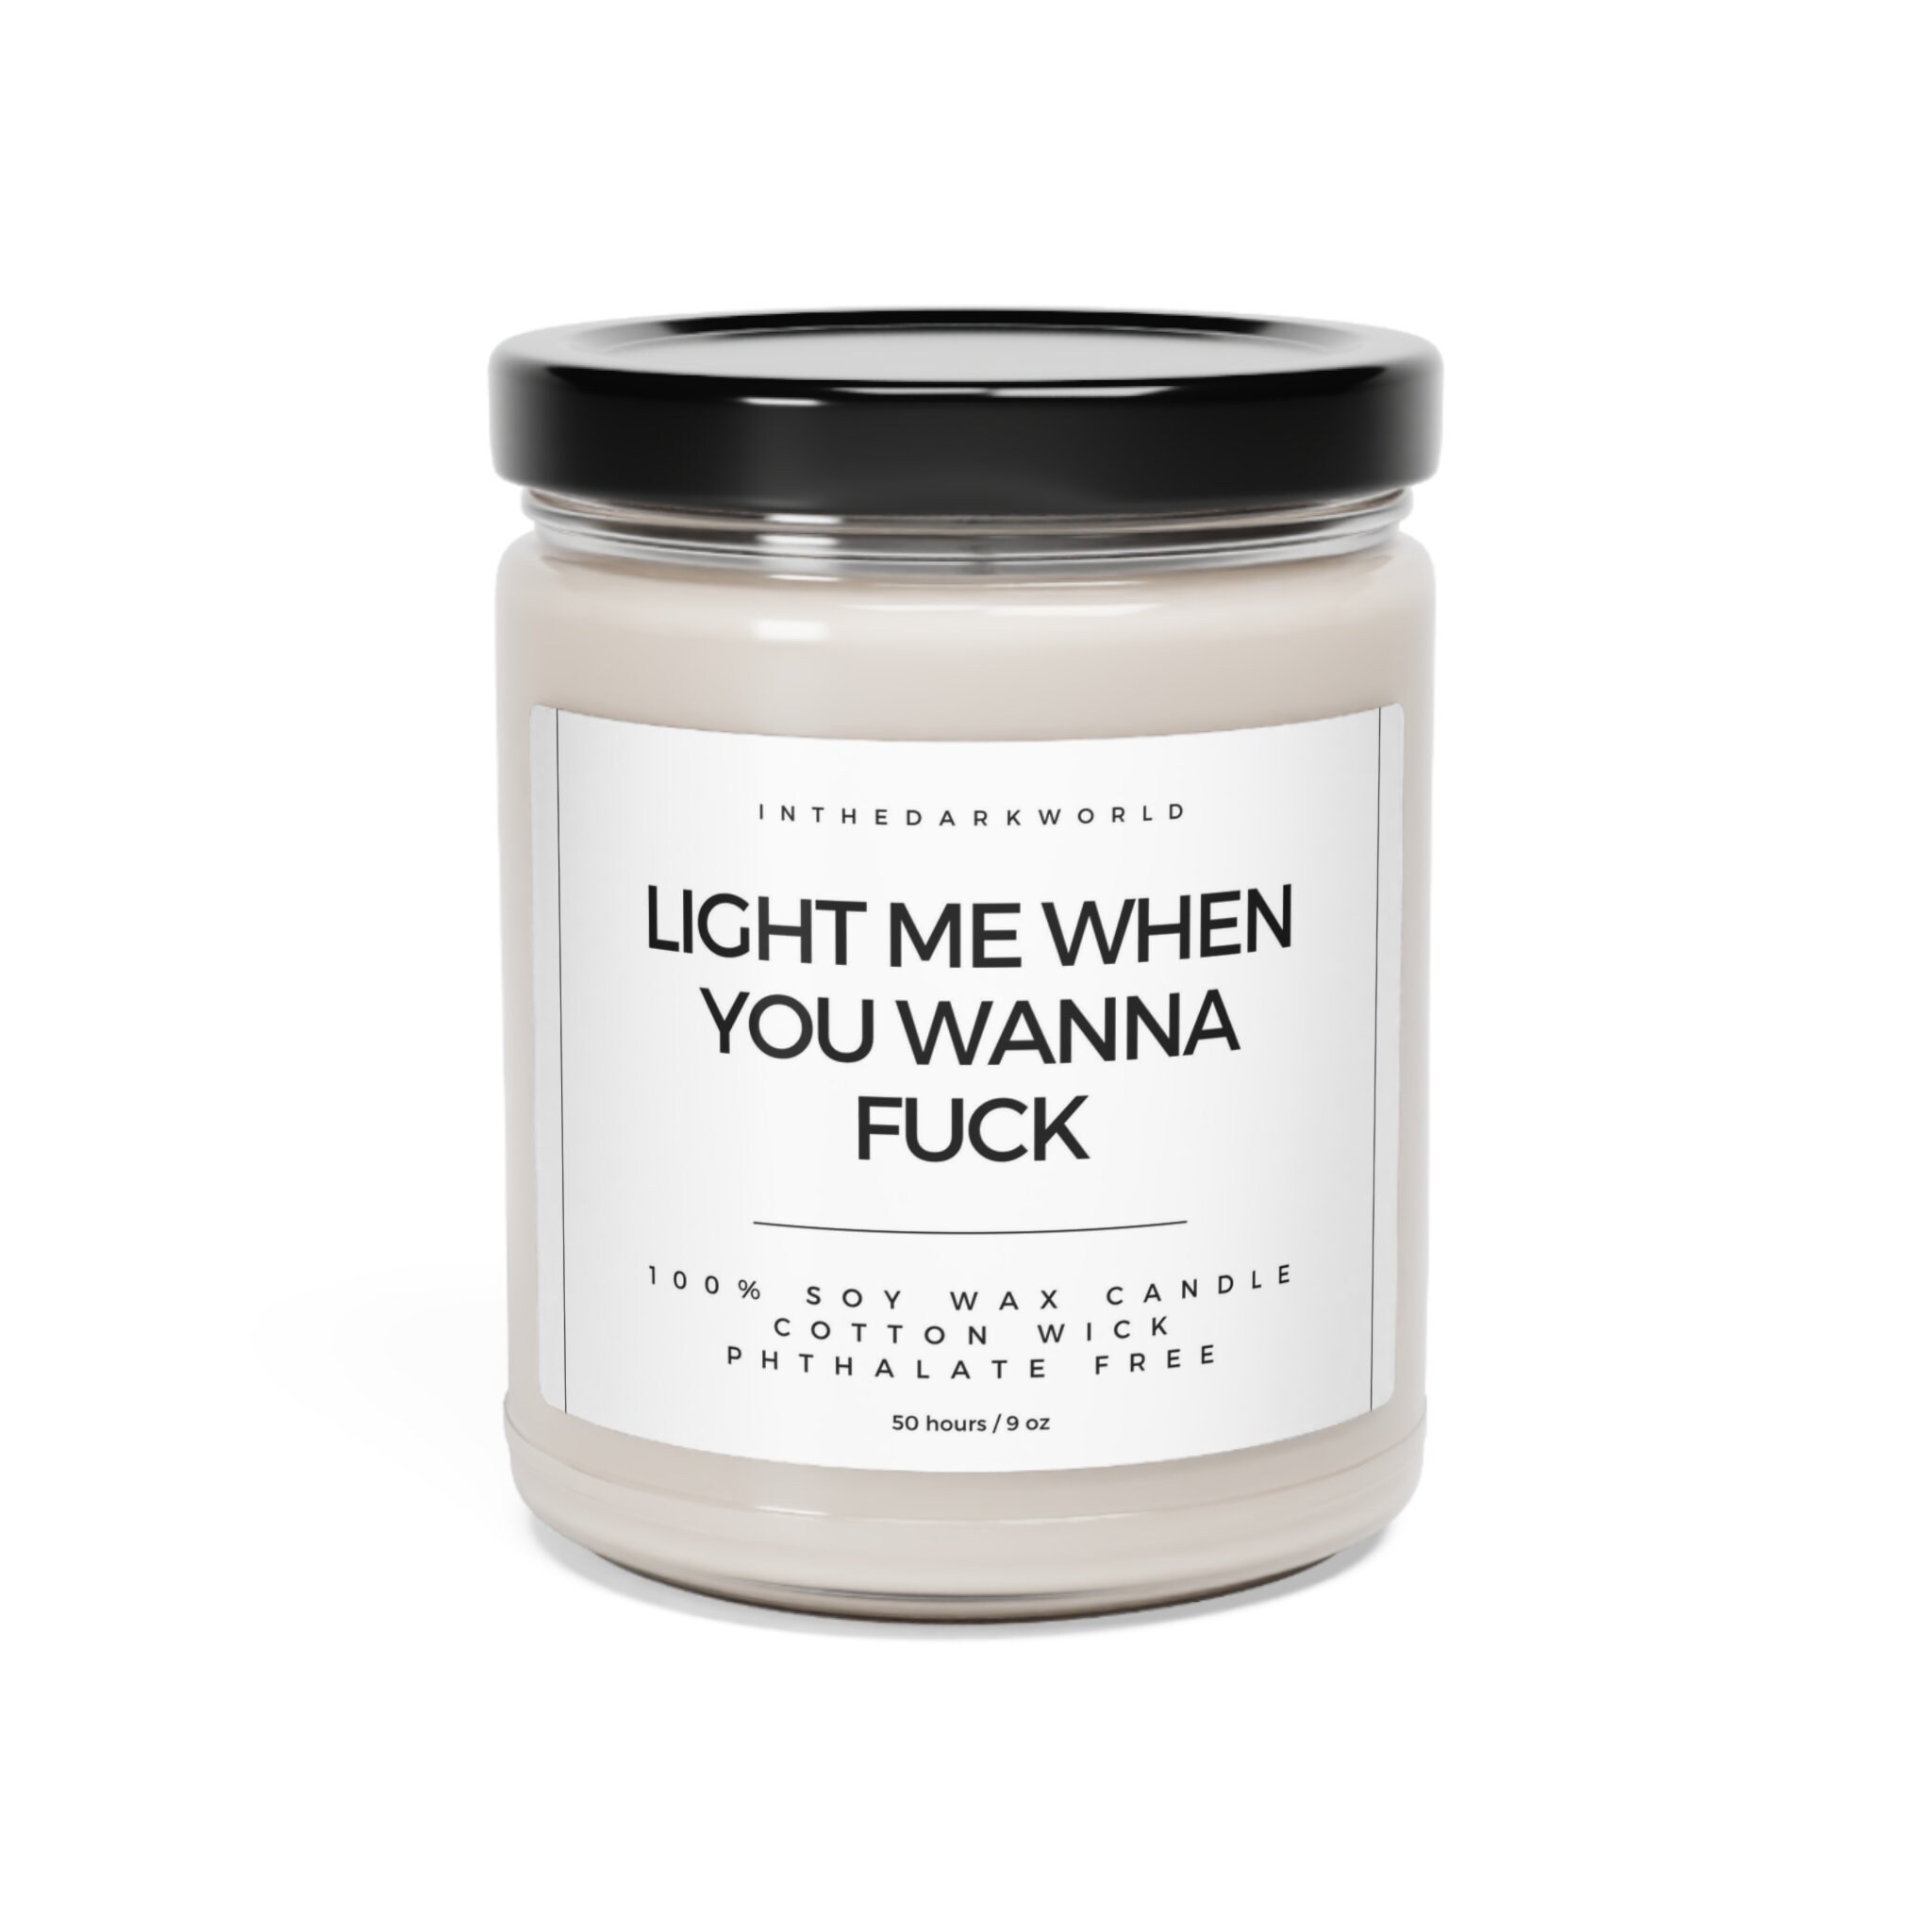 Fuck Your Ex - Cotton Candy Scented 16oz Soy Candle – Miami'sGarden